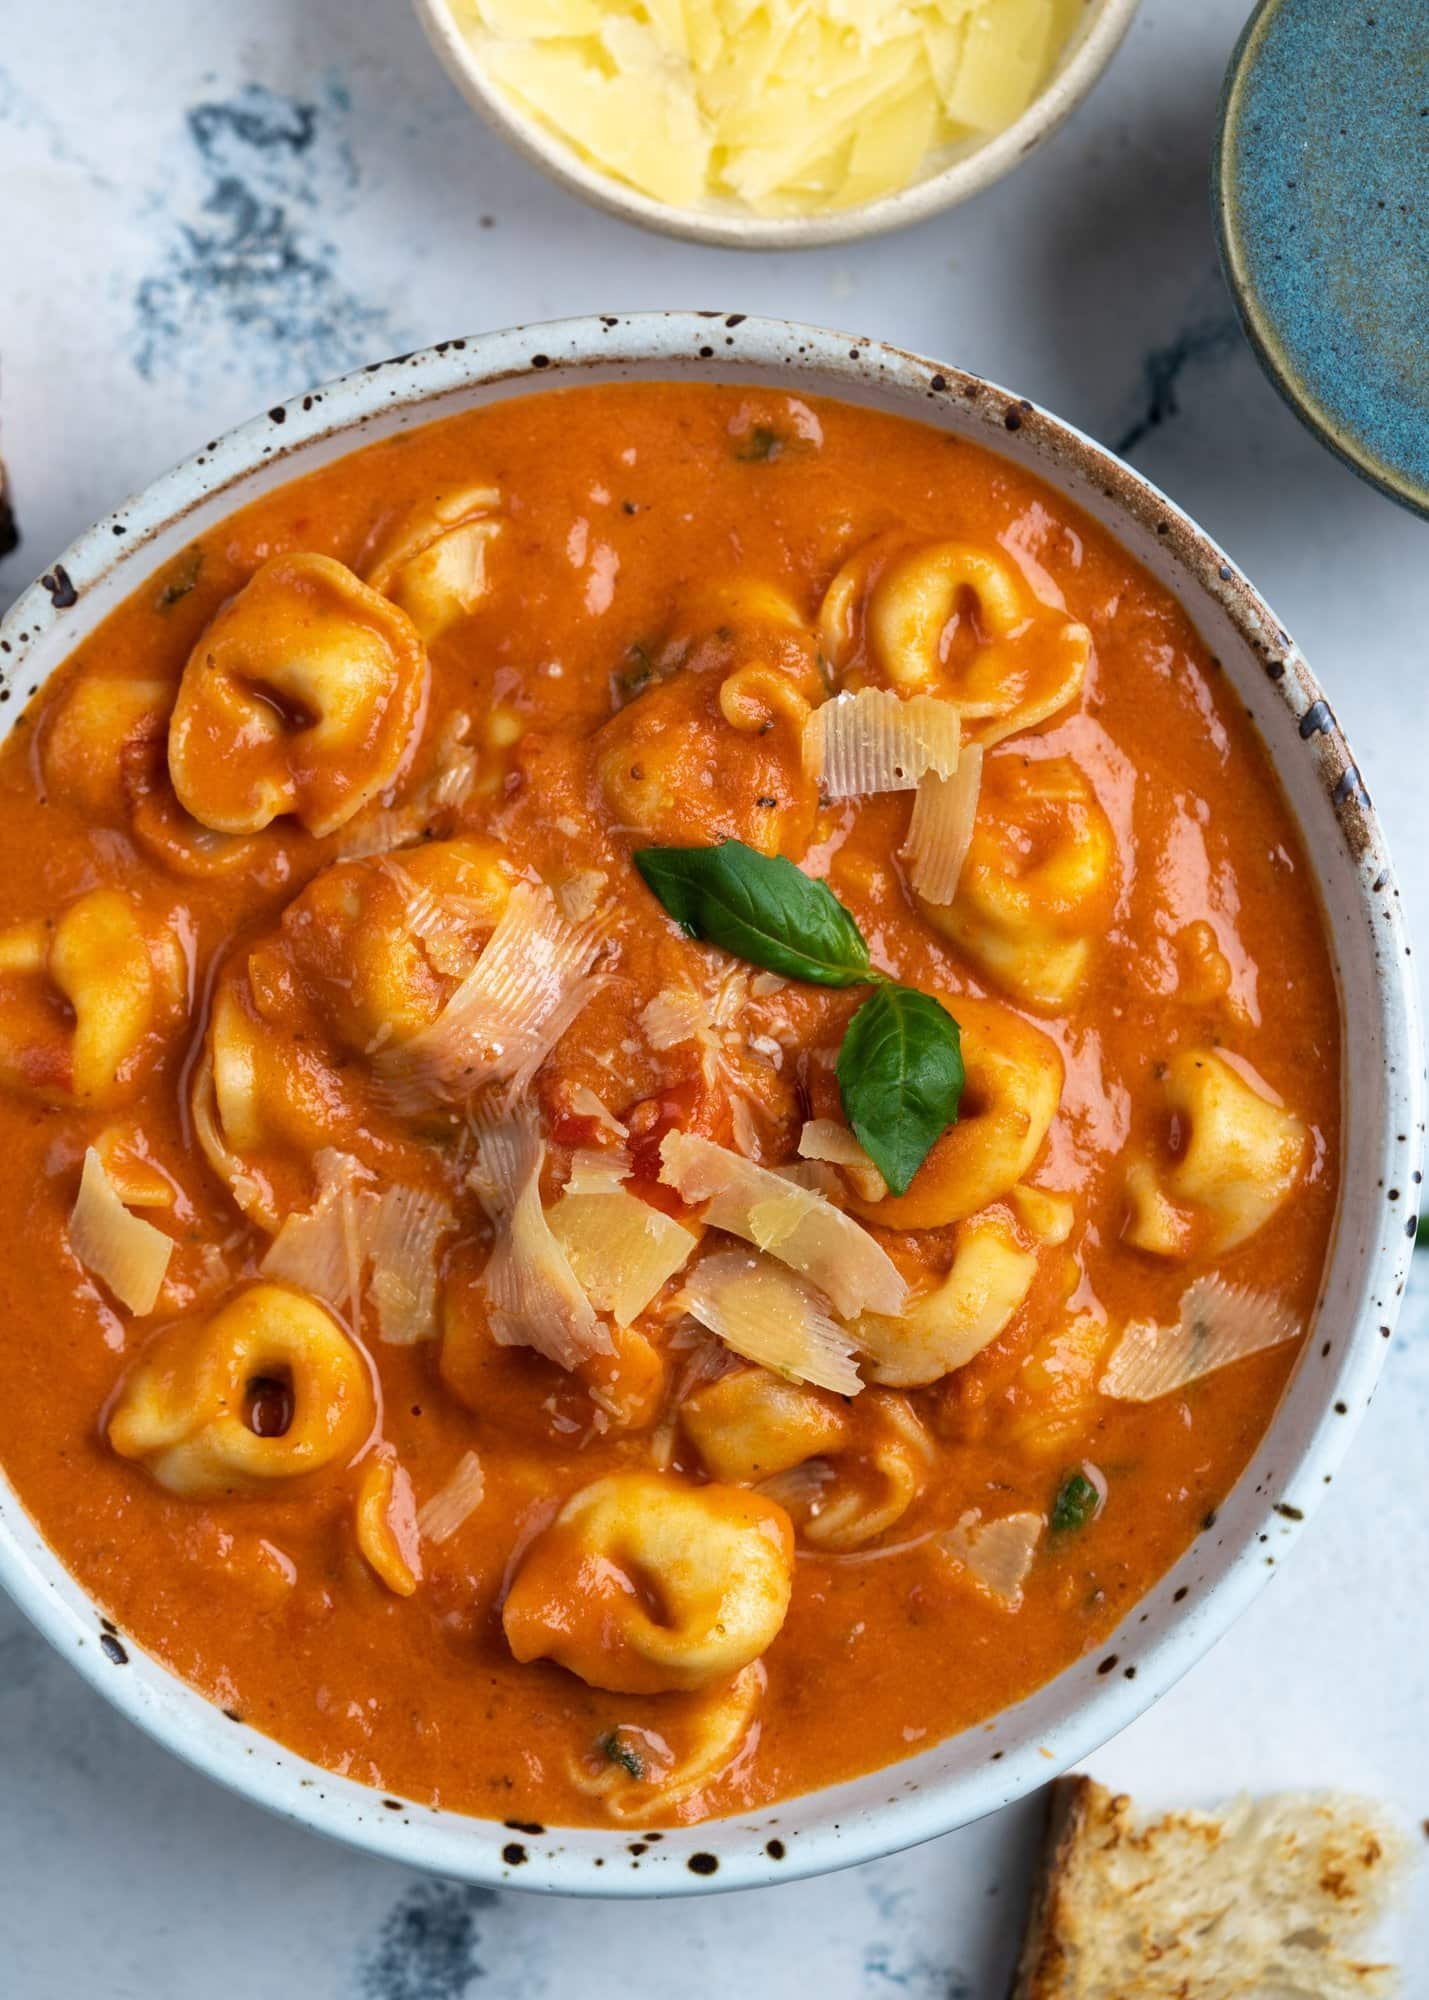 Close up shown of tomato tortellini soup showing tortellini pasta, parmesan cheese, fresh basil. Served with slice of bread.